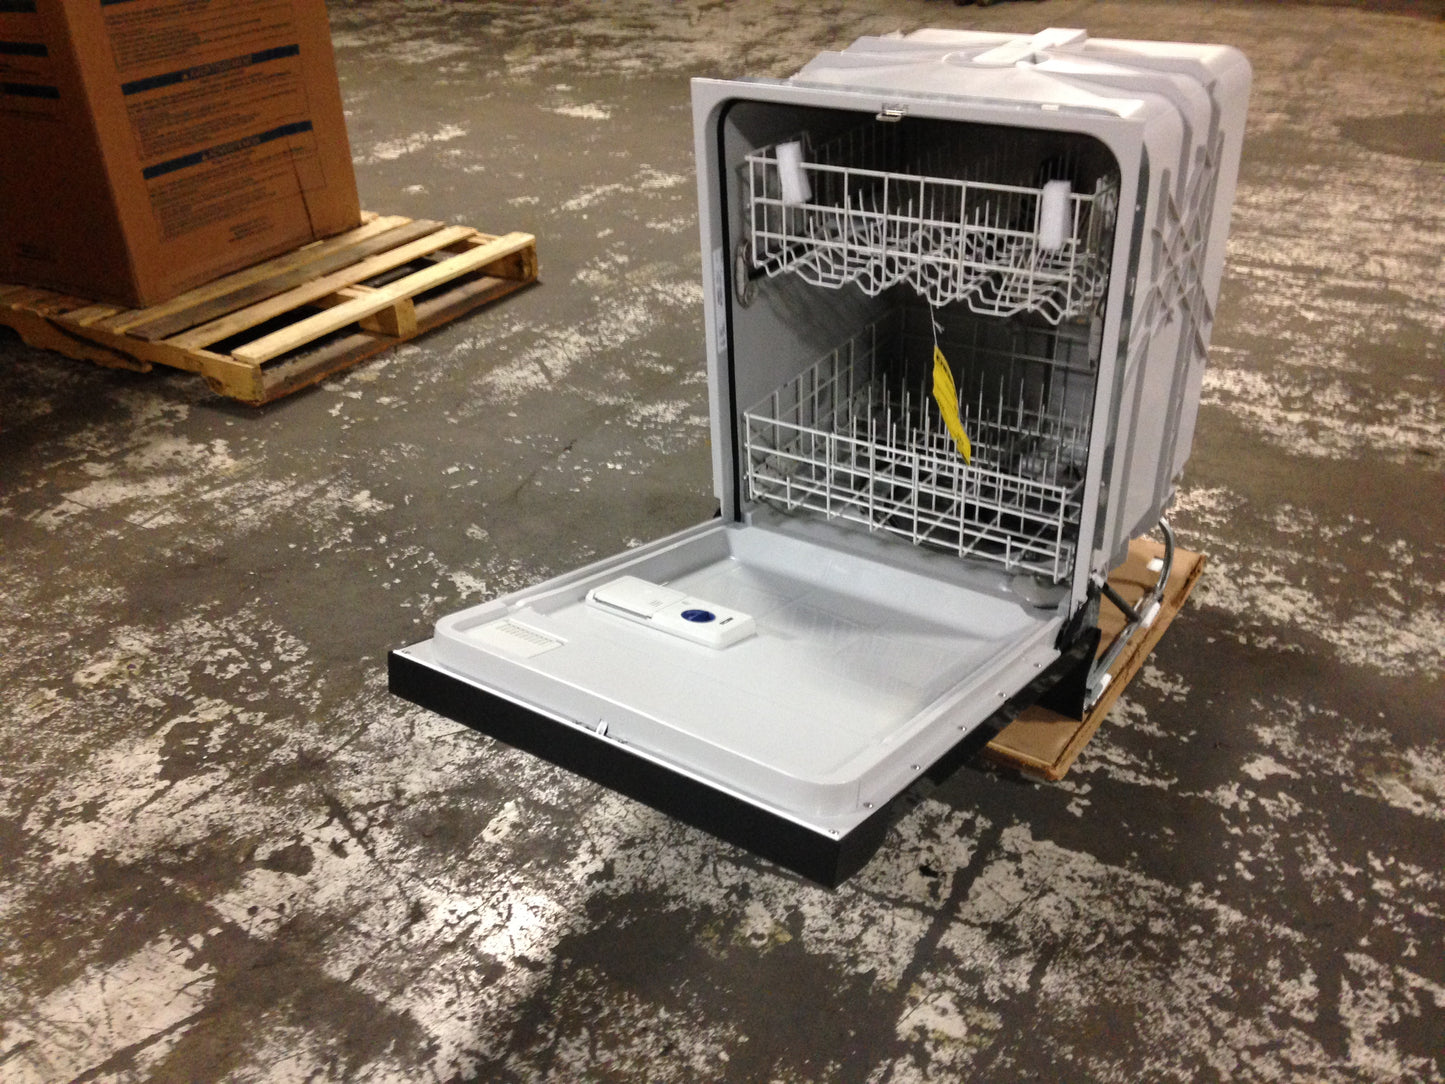 24" FRONT CONTROL BUILT-IN DISHWASHER, 120/60